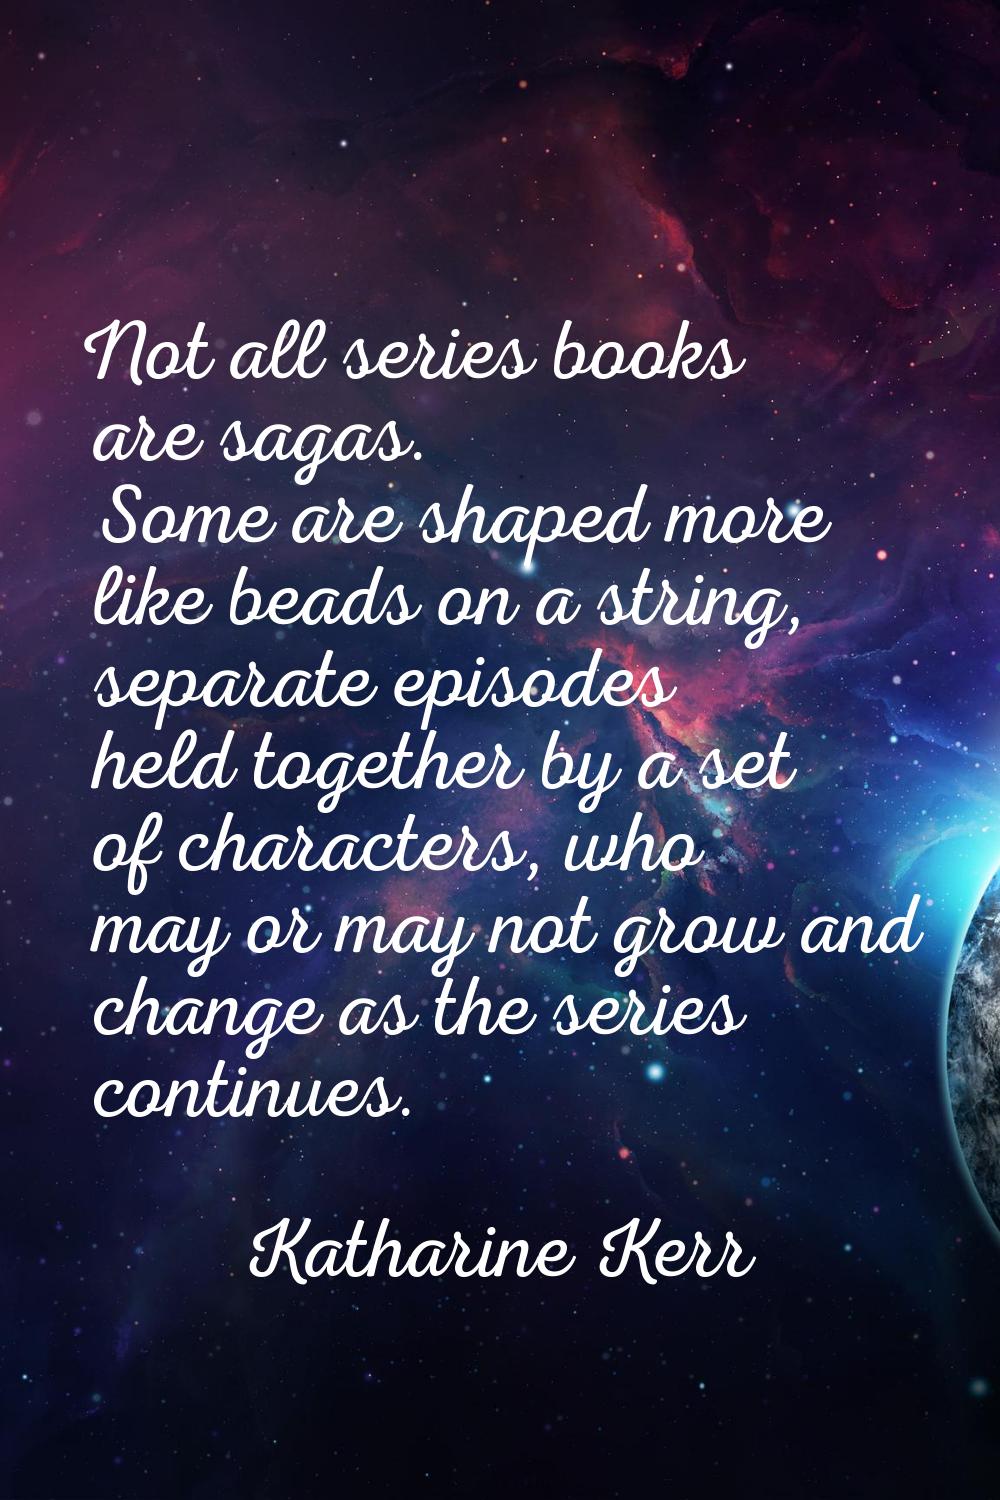 Not all series books are sagas. Some are shaped more like beads on a string, separate episodes held